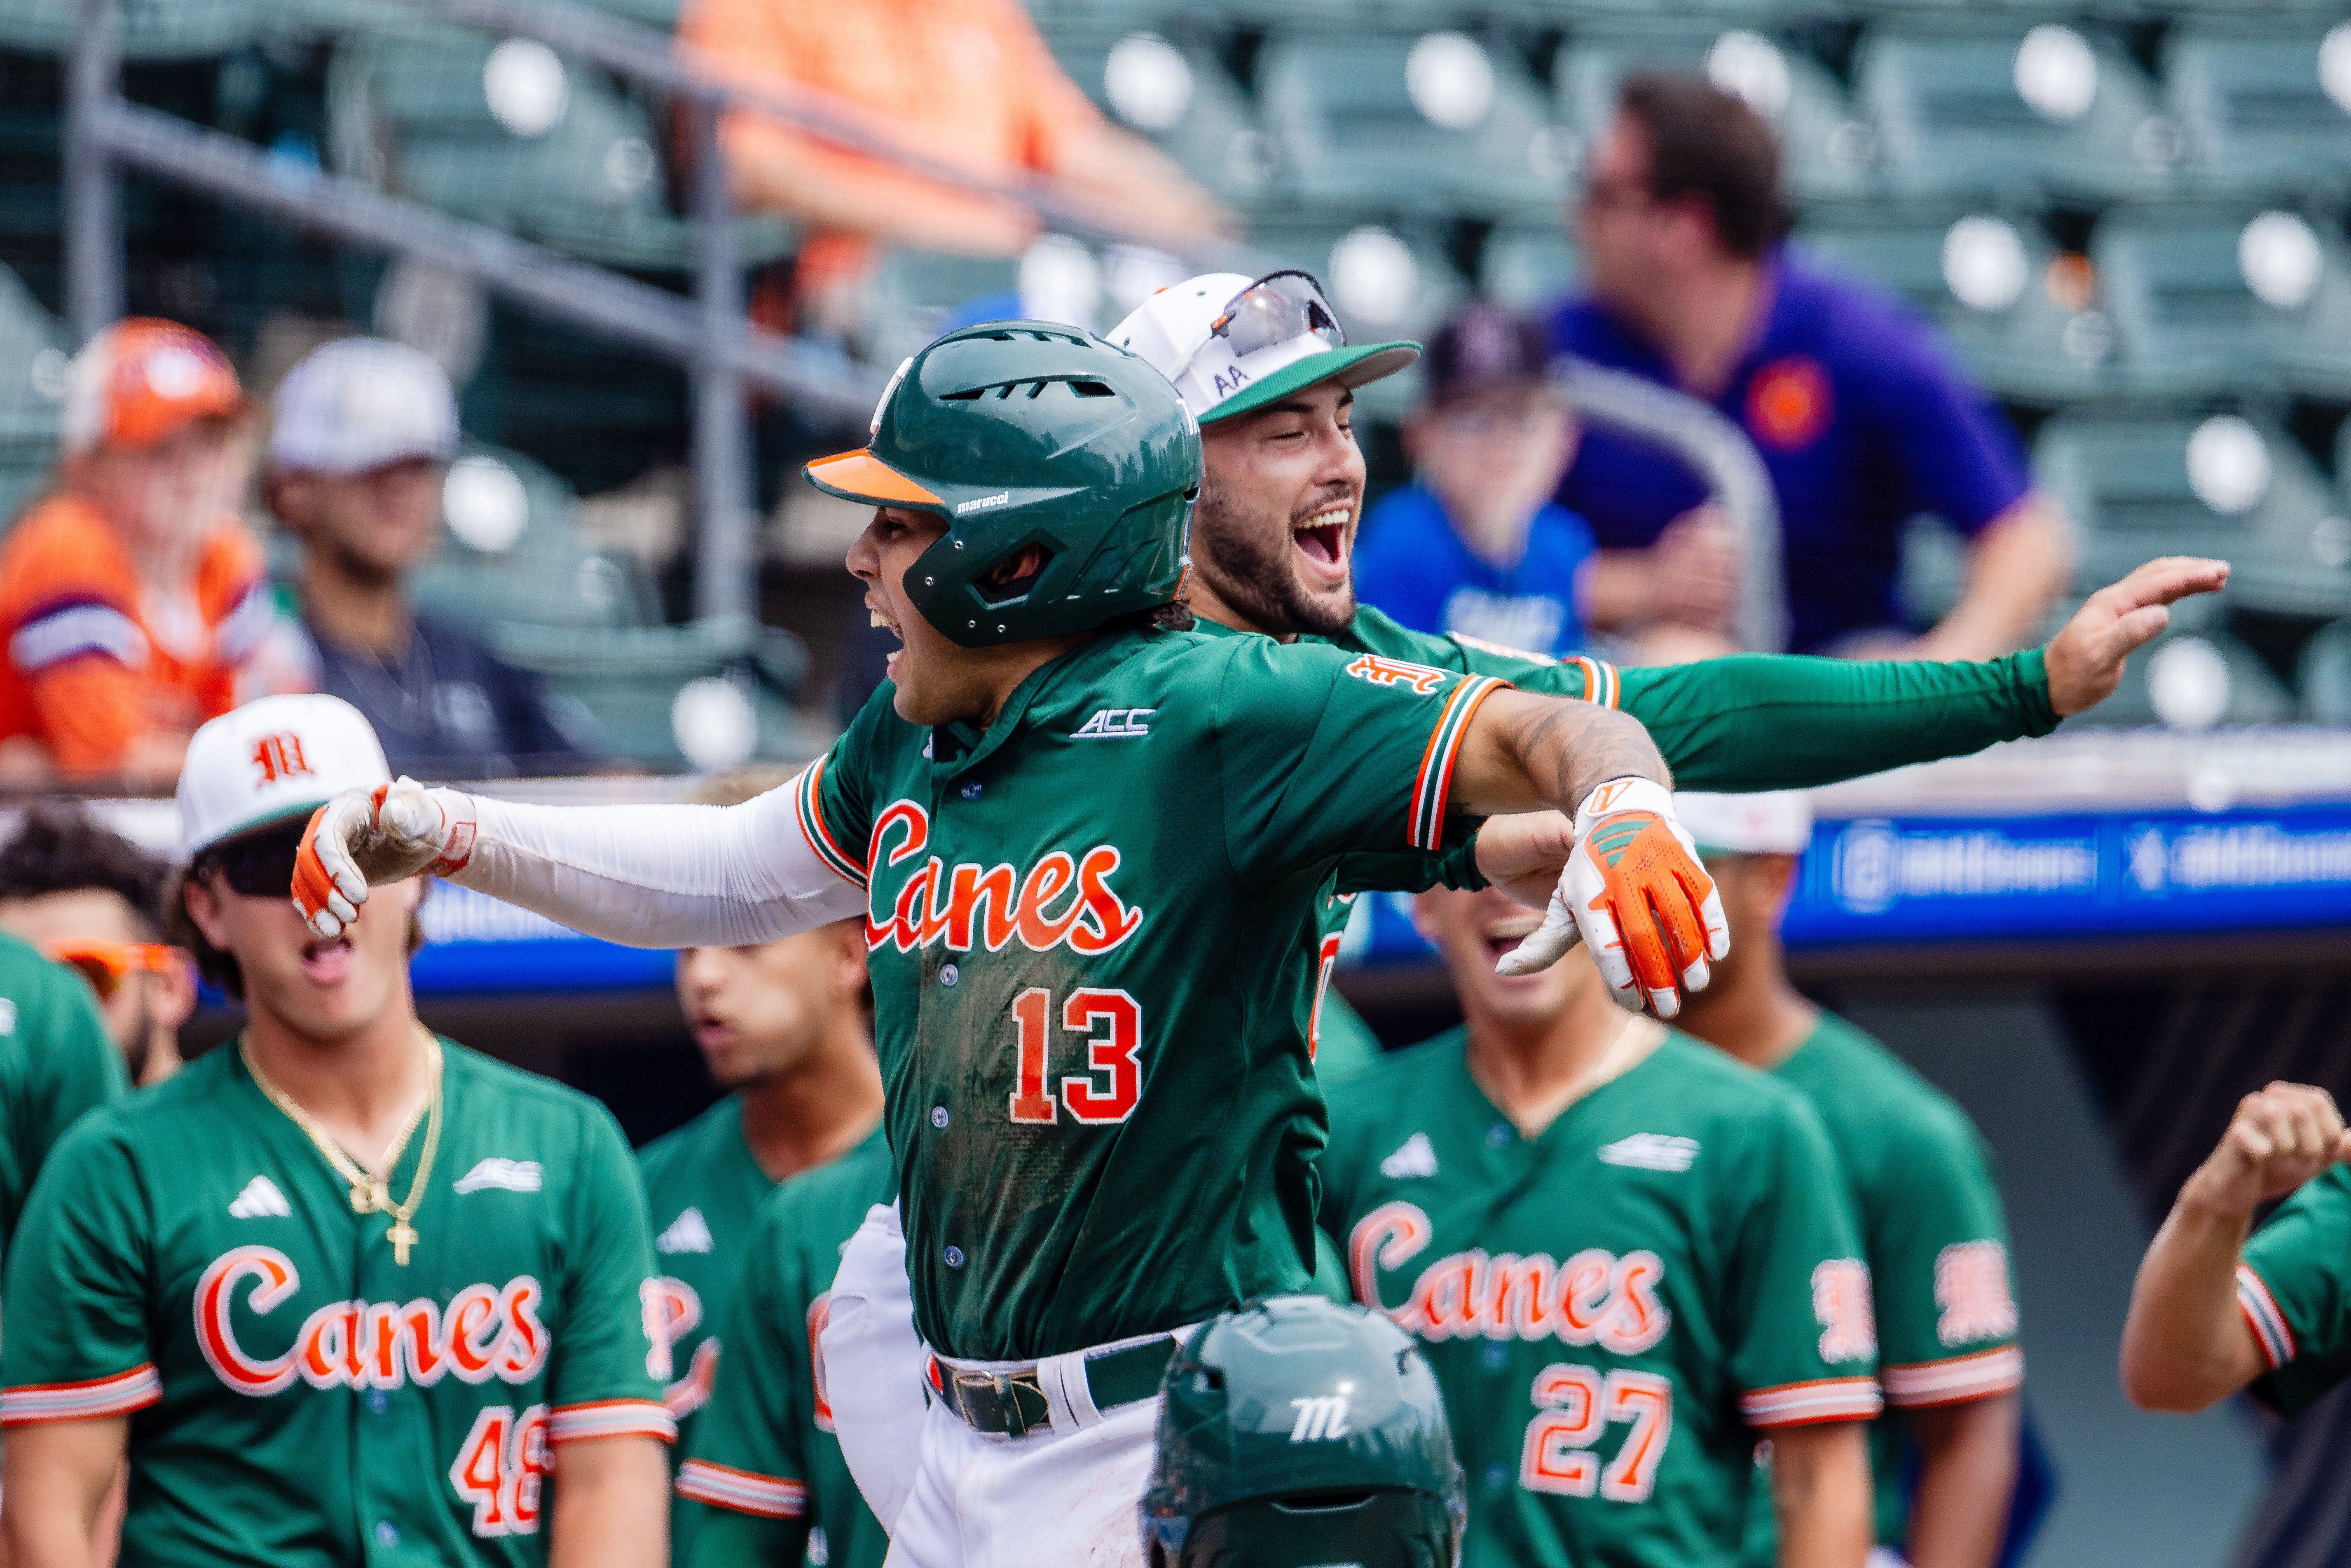 The Miami Hurricanes will be keen on winning the ACC Tournament this year.